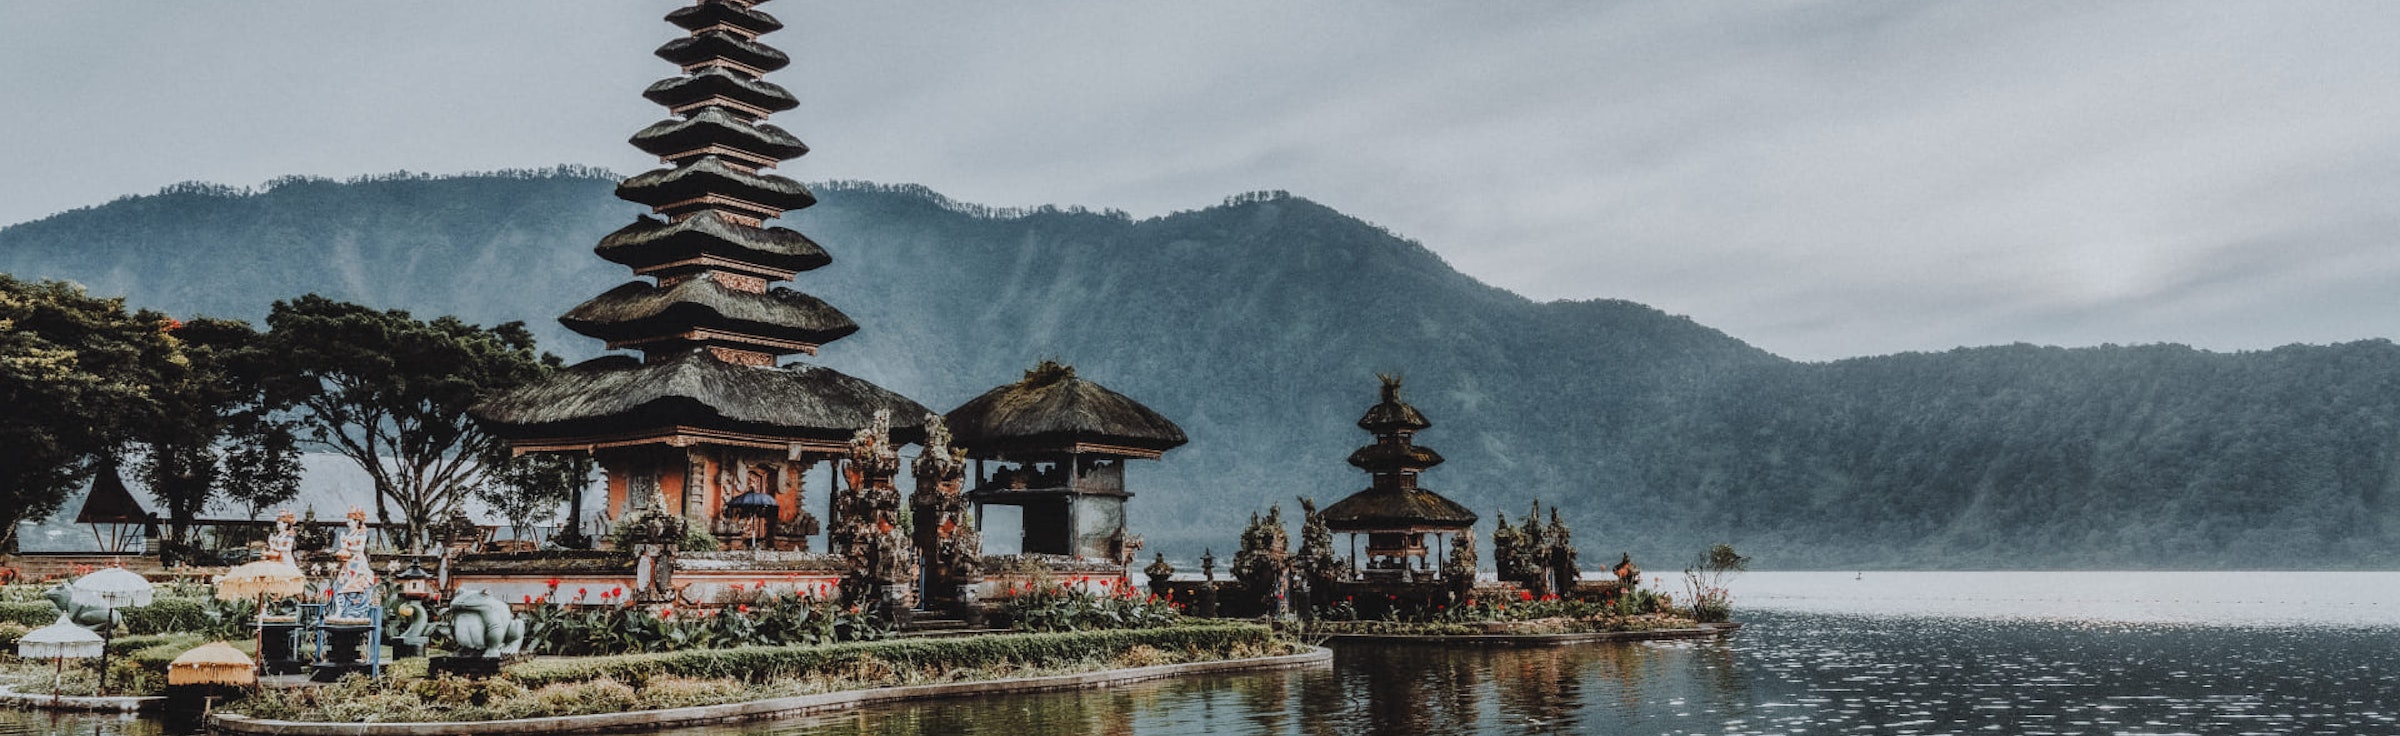 Bali Solo Travel Packages